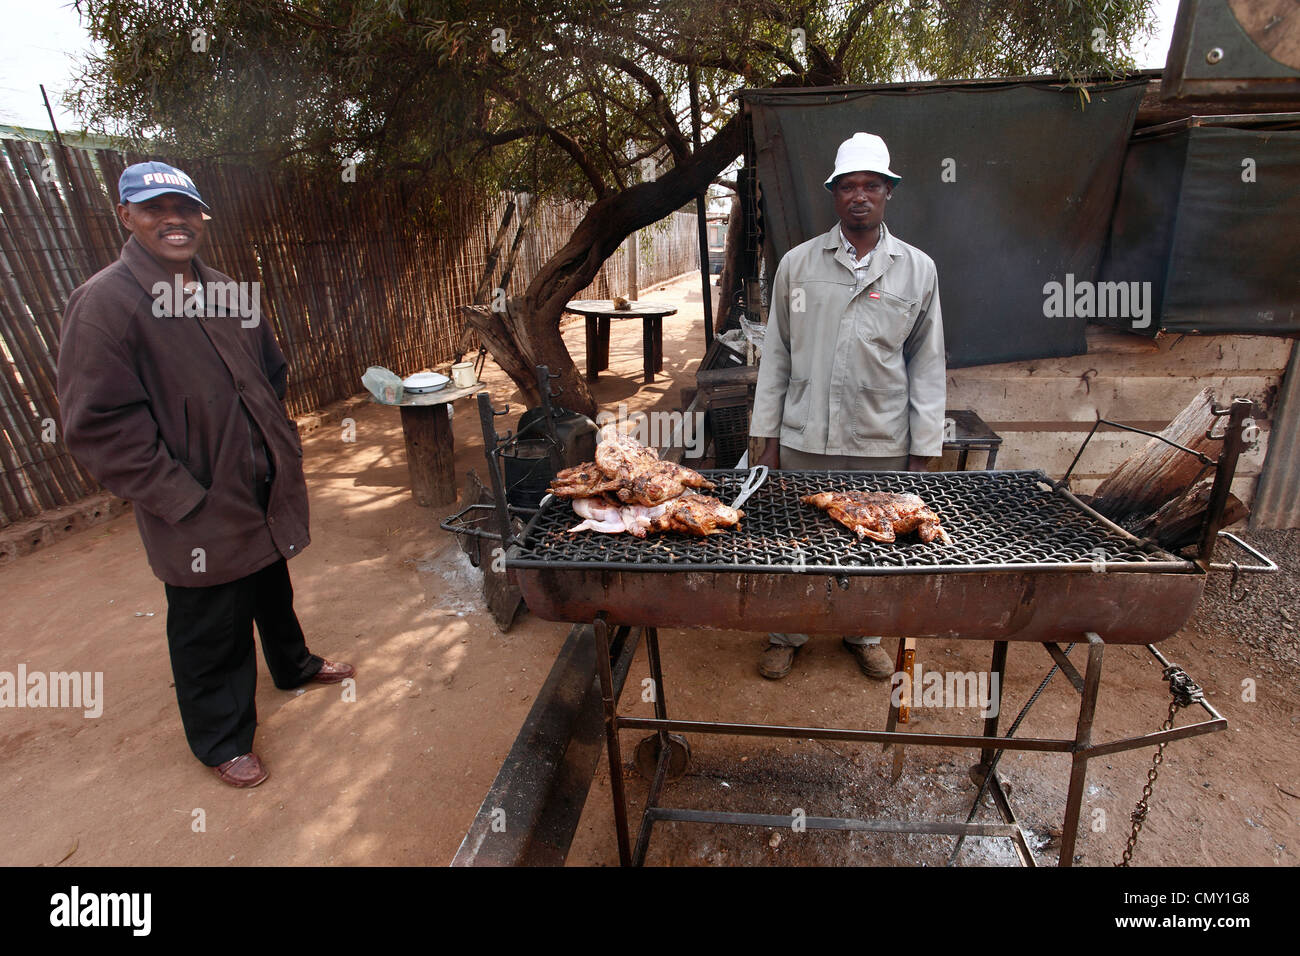 Man is selling a roast chicken on the street in a small town in RSA. Stock Photo